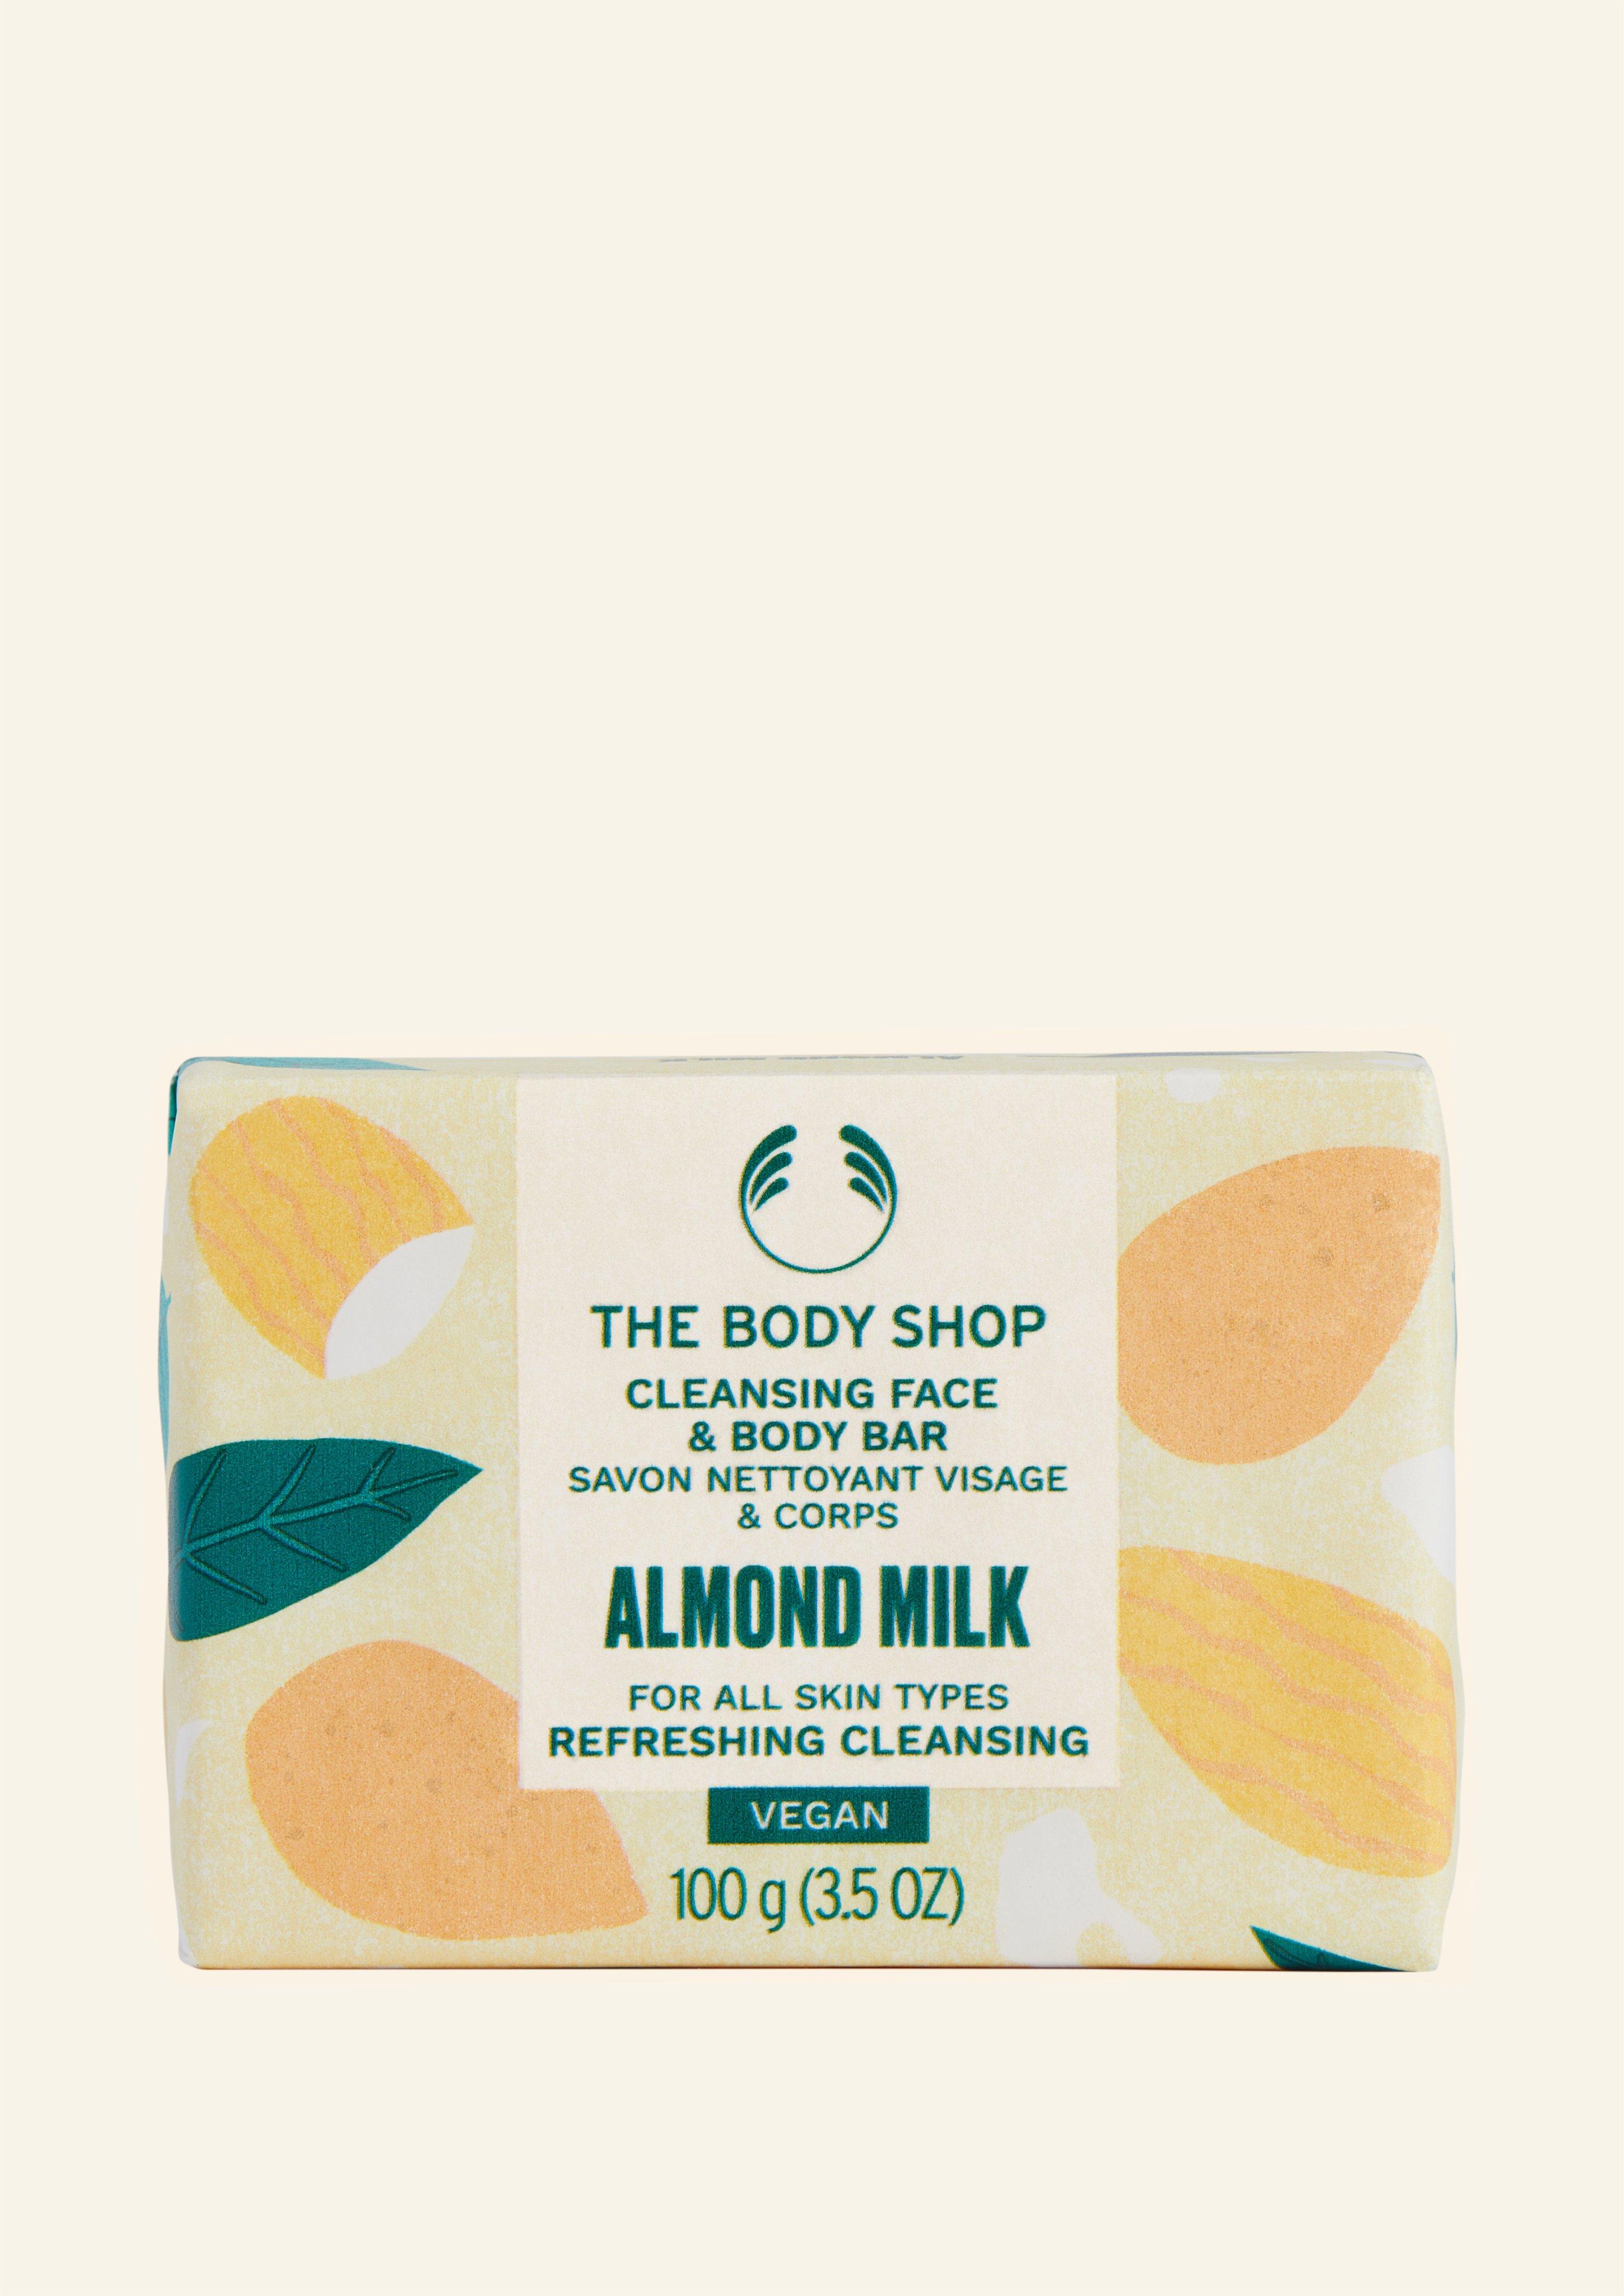 The Body Shop Almond Milk Cleans